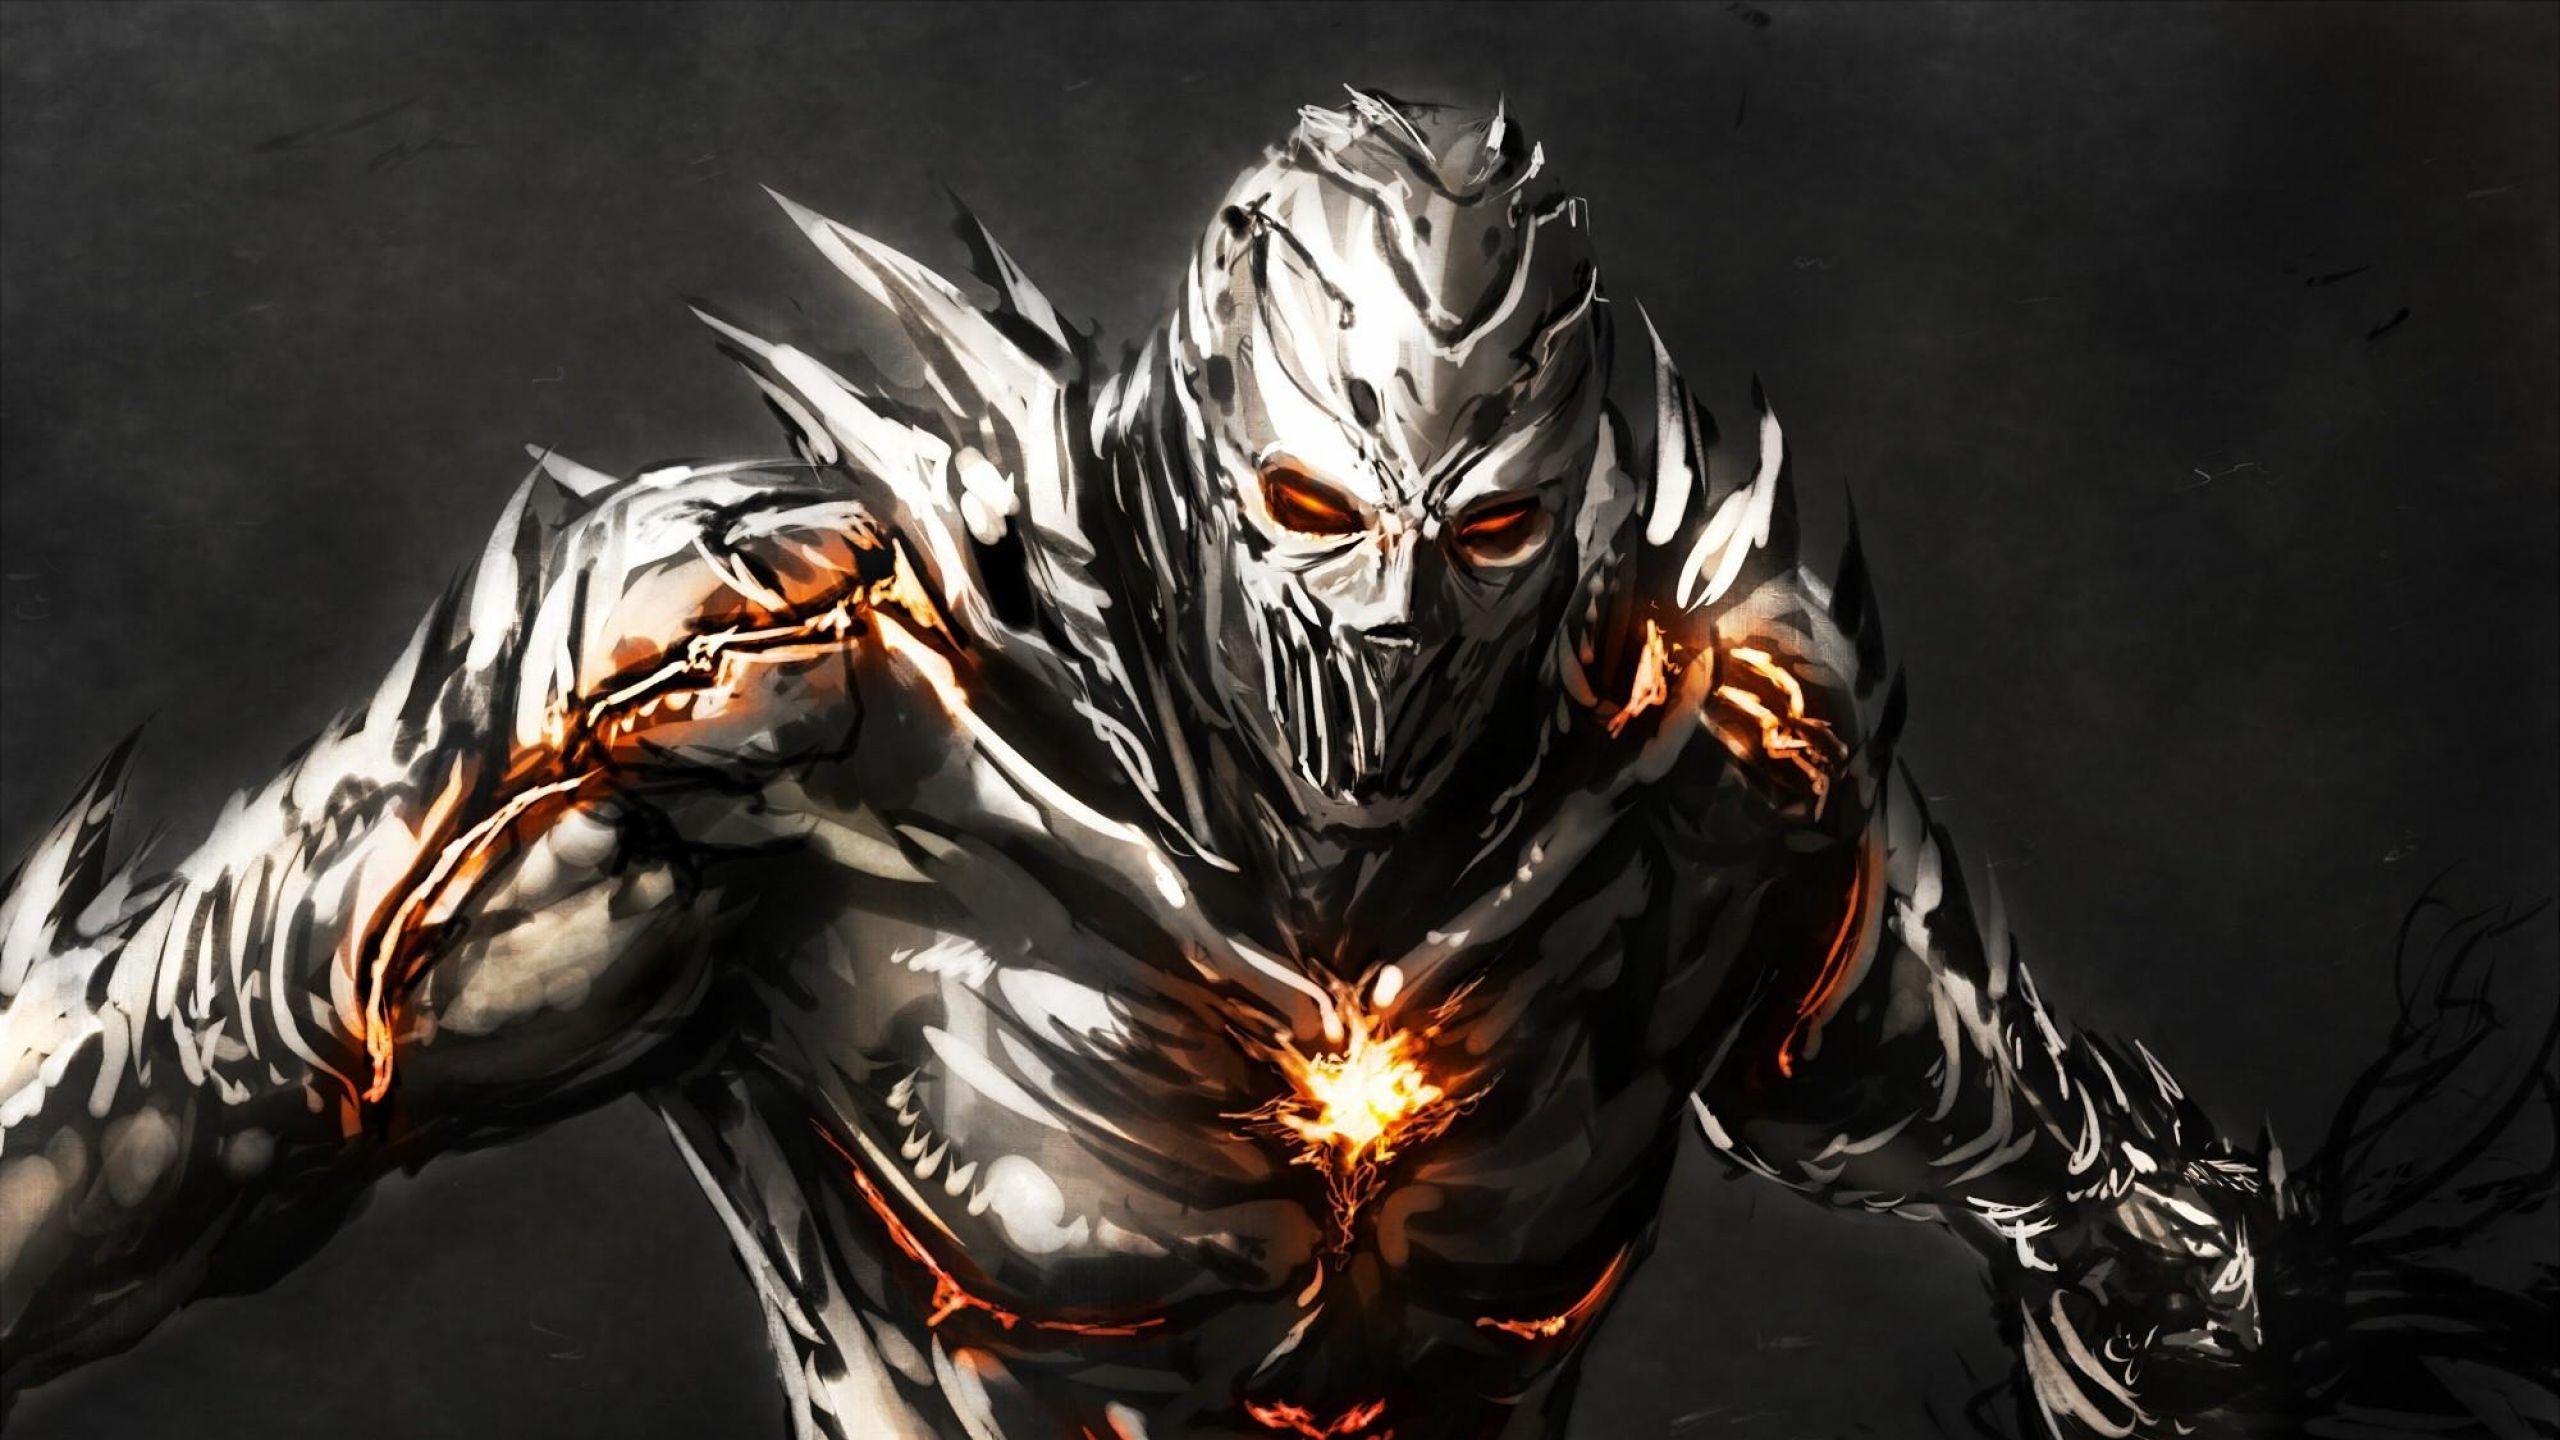 Download Wallpaper 2560x1440 Monster, Iron, Crack, Fire, Aggression